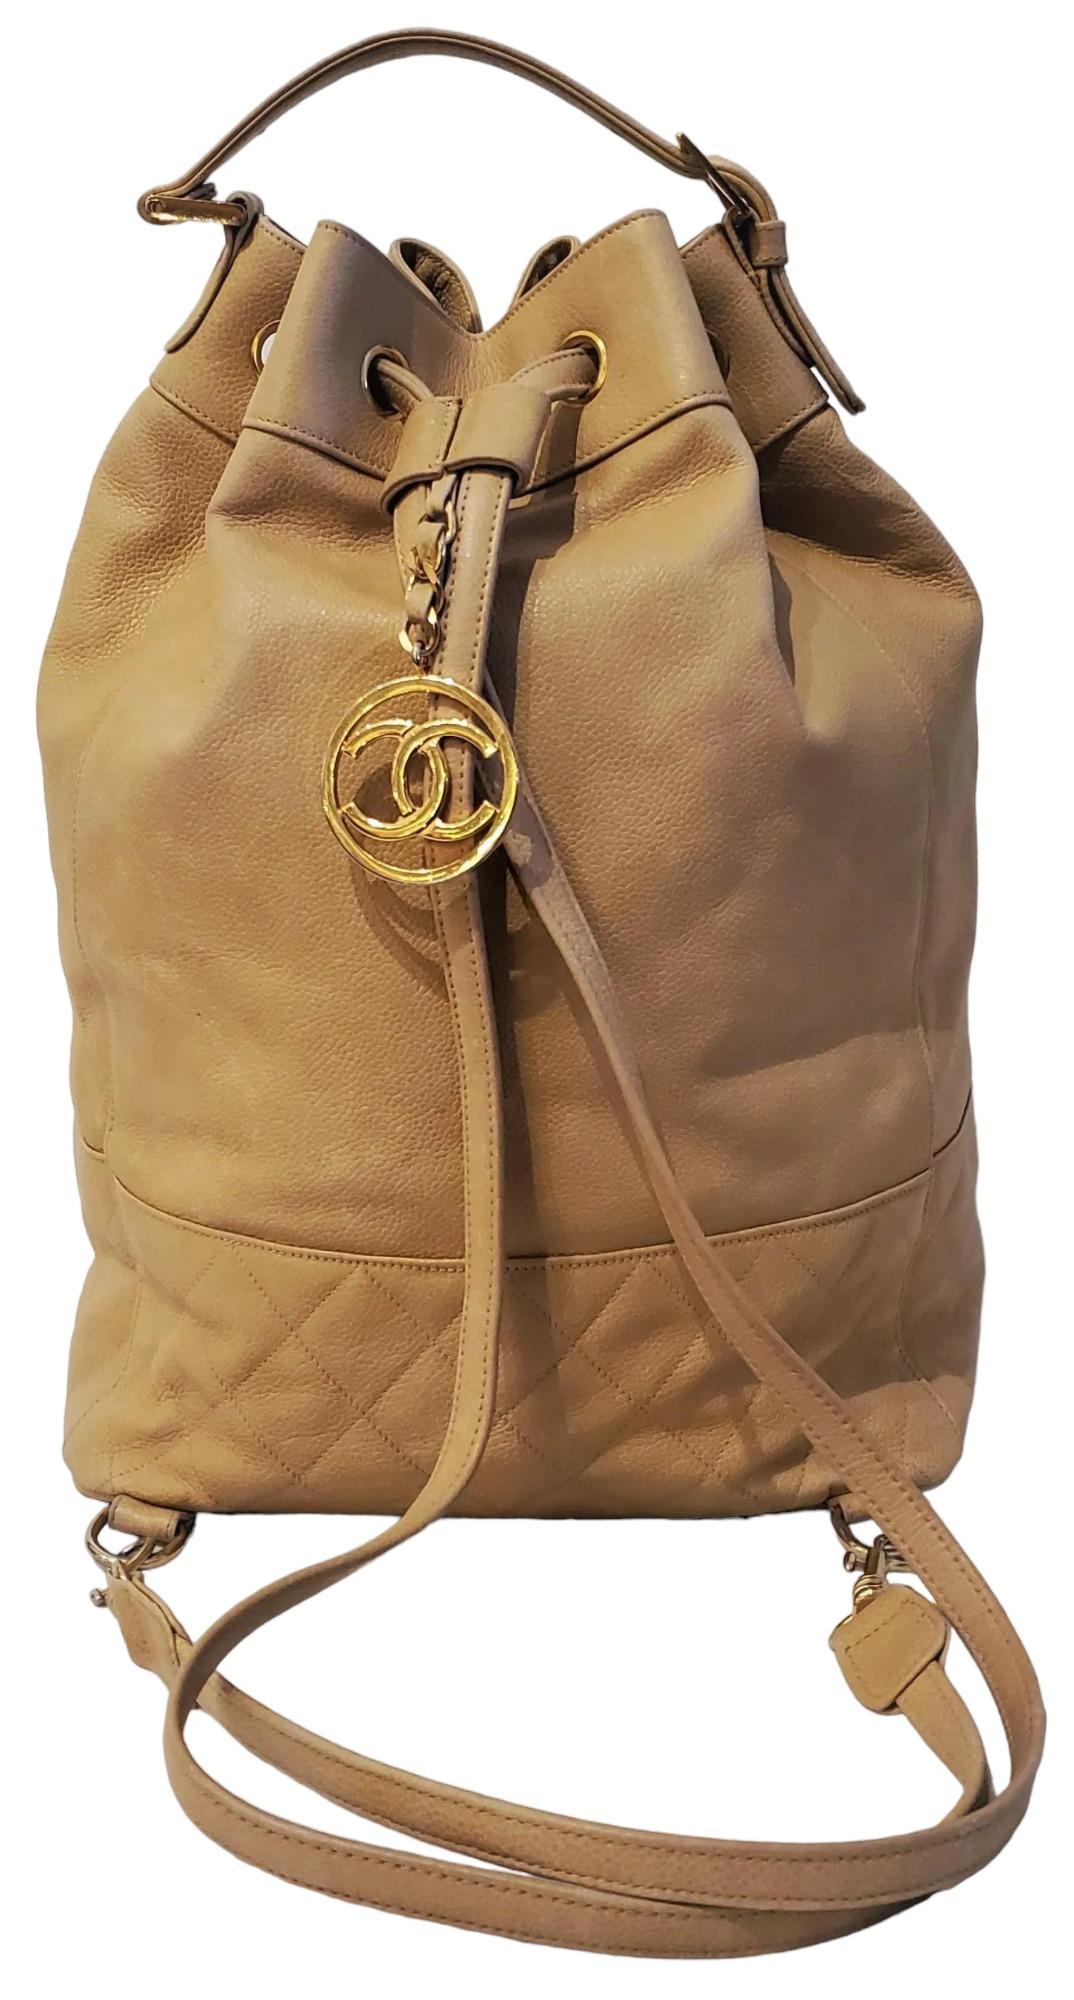 Authentic Chanel Camel Caviar Skin Backpack Gold.
Tan Caviar leather drawstring backpack/ handbag. The straps are adjustable and removable. There is a gold CC pendant on the long backpack straps that adjust with tightening of the straps. The handbag